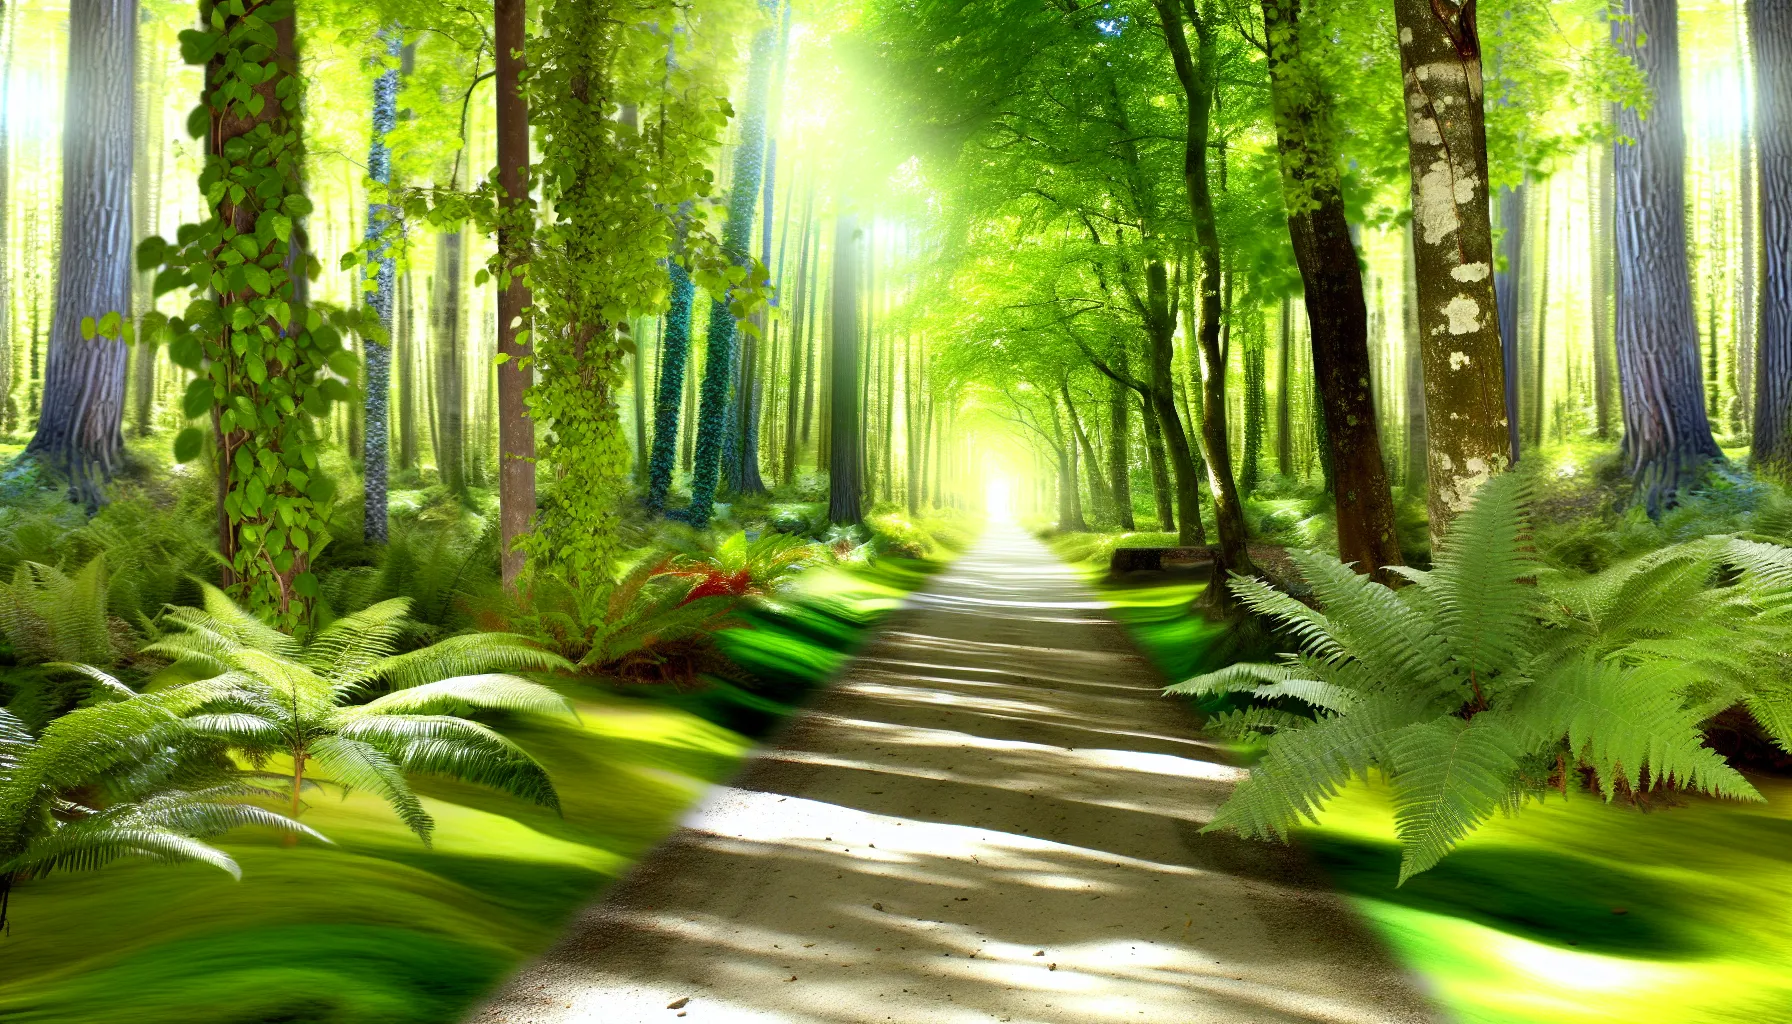 A path through a forest symbolizing new beginnings